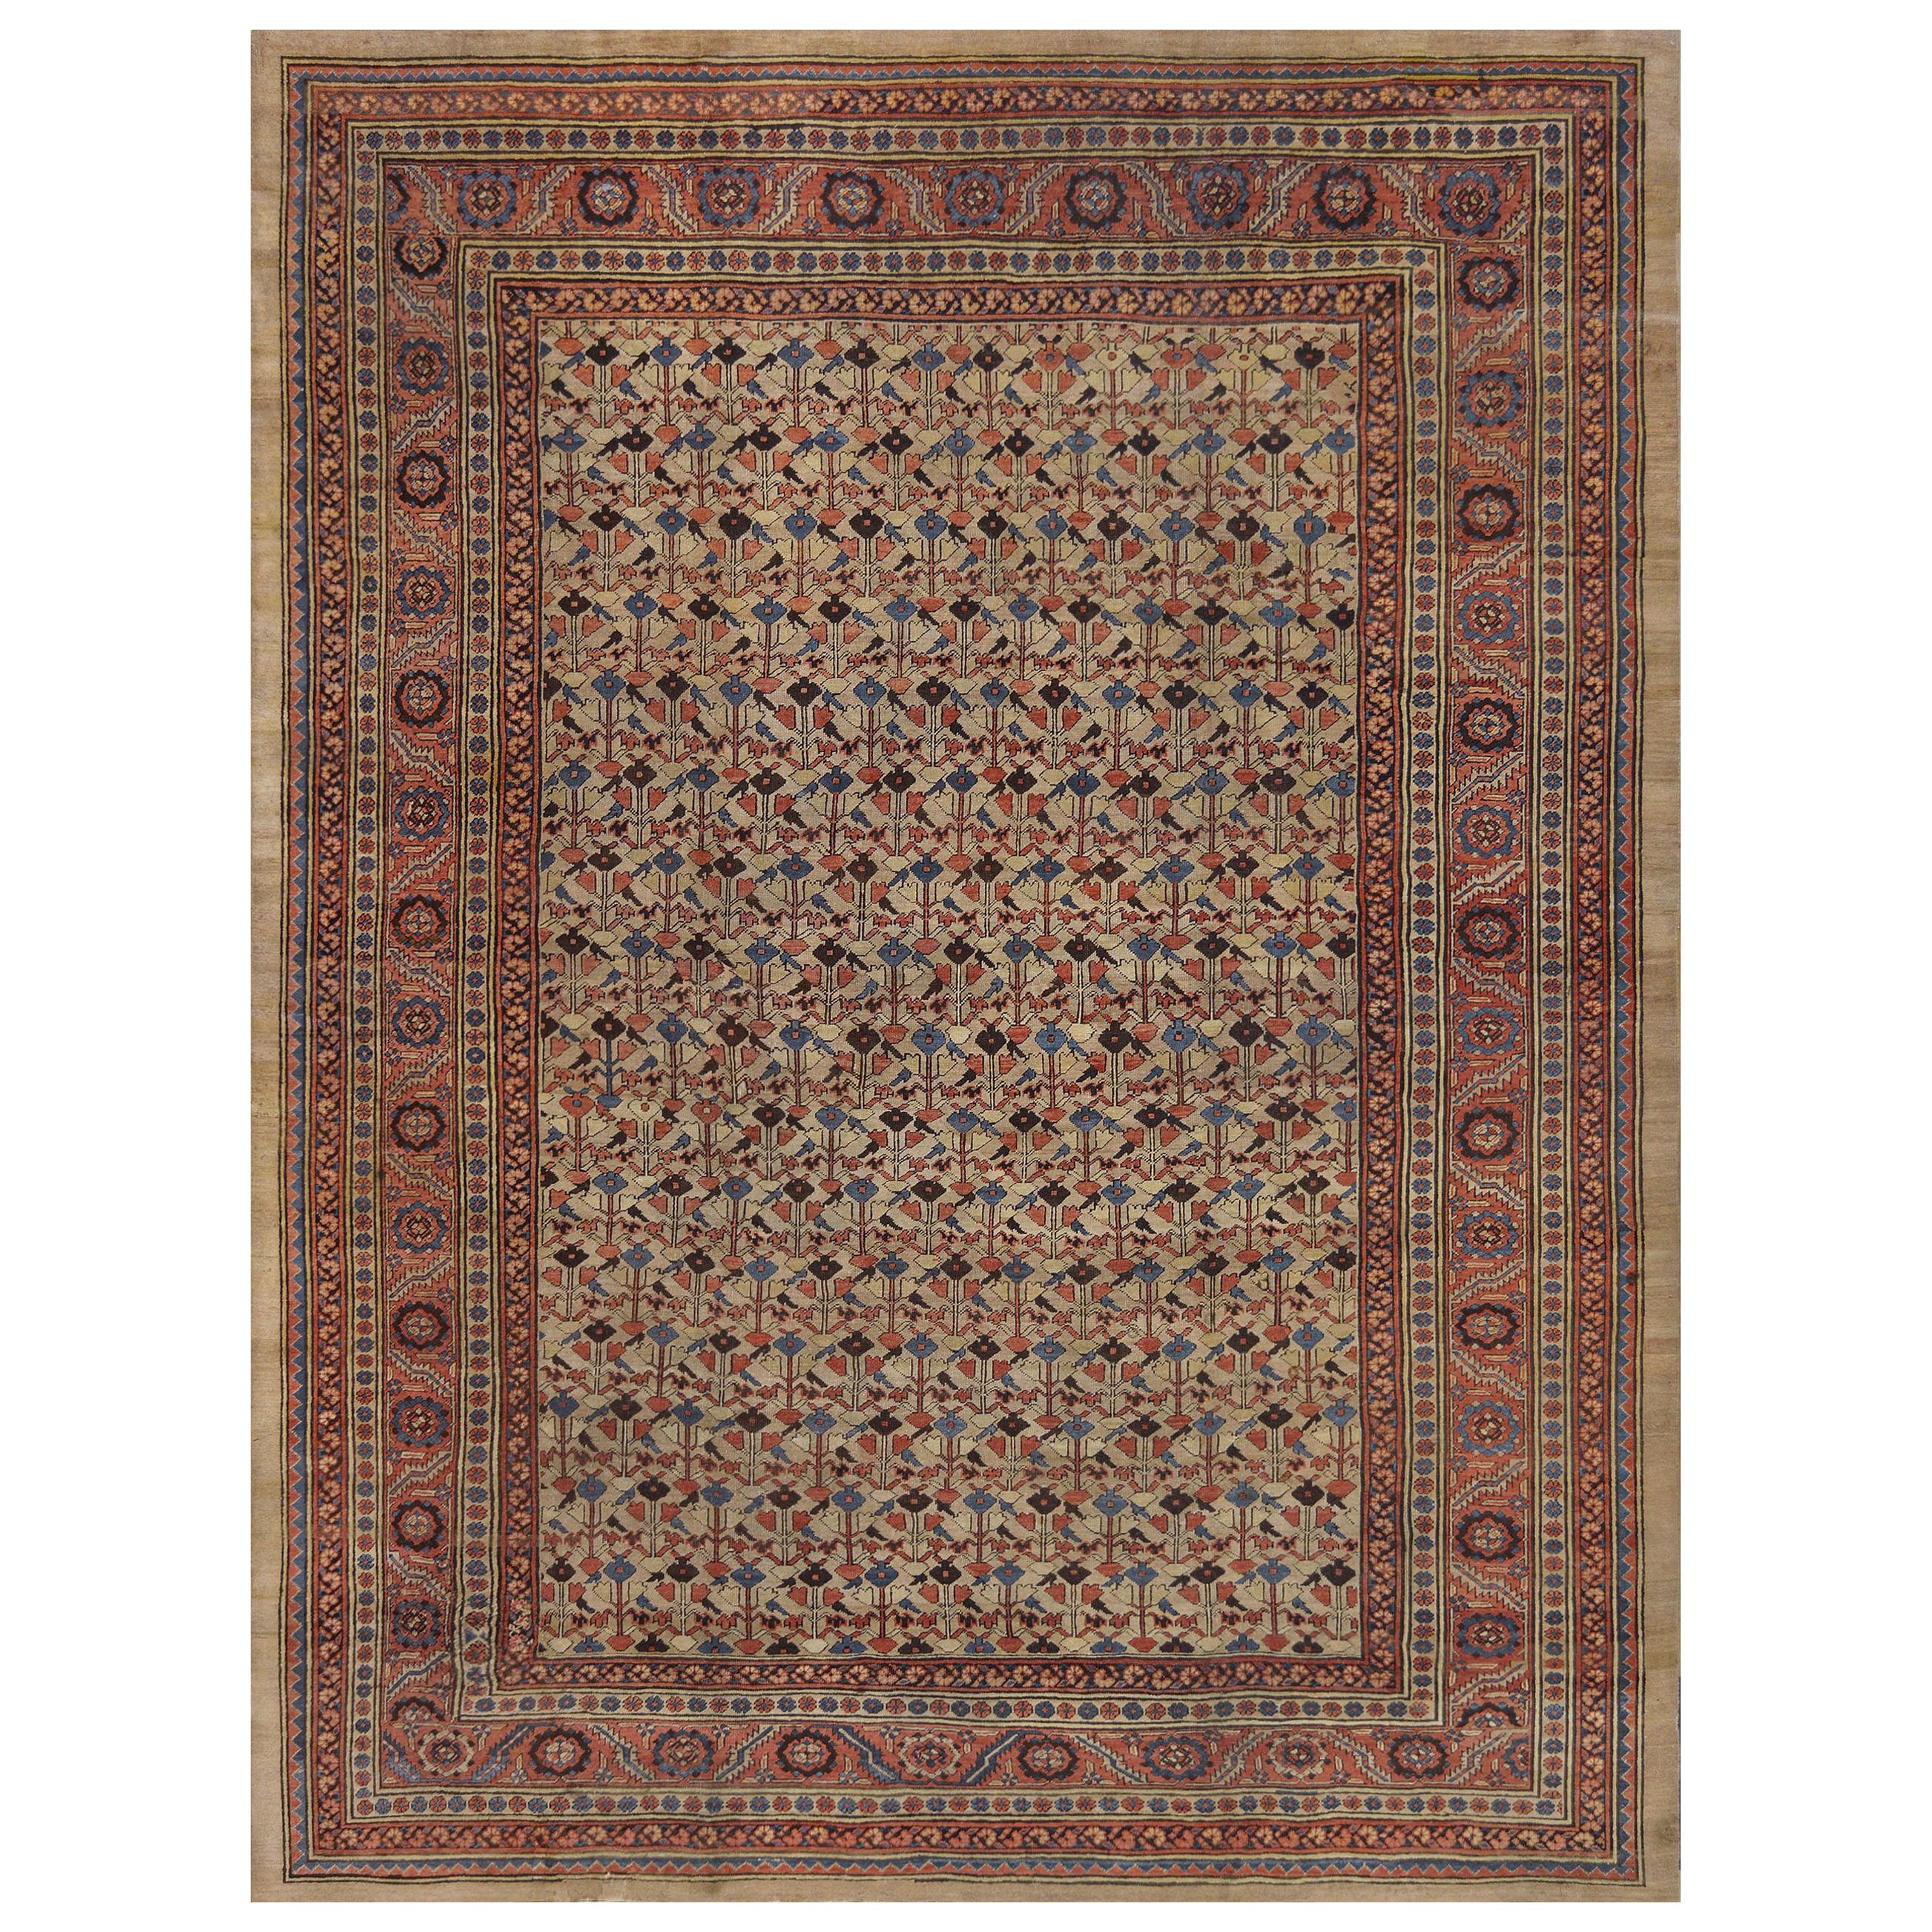 Late 19th Century Wool Bakhshaish Rug from North West Persia